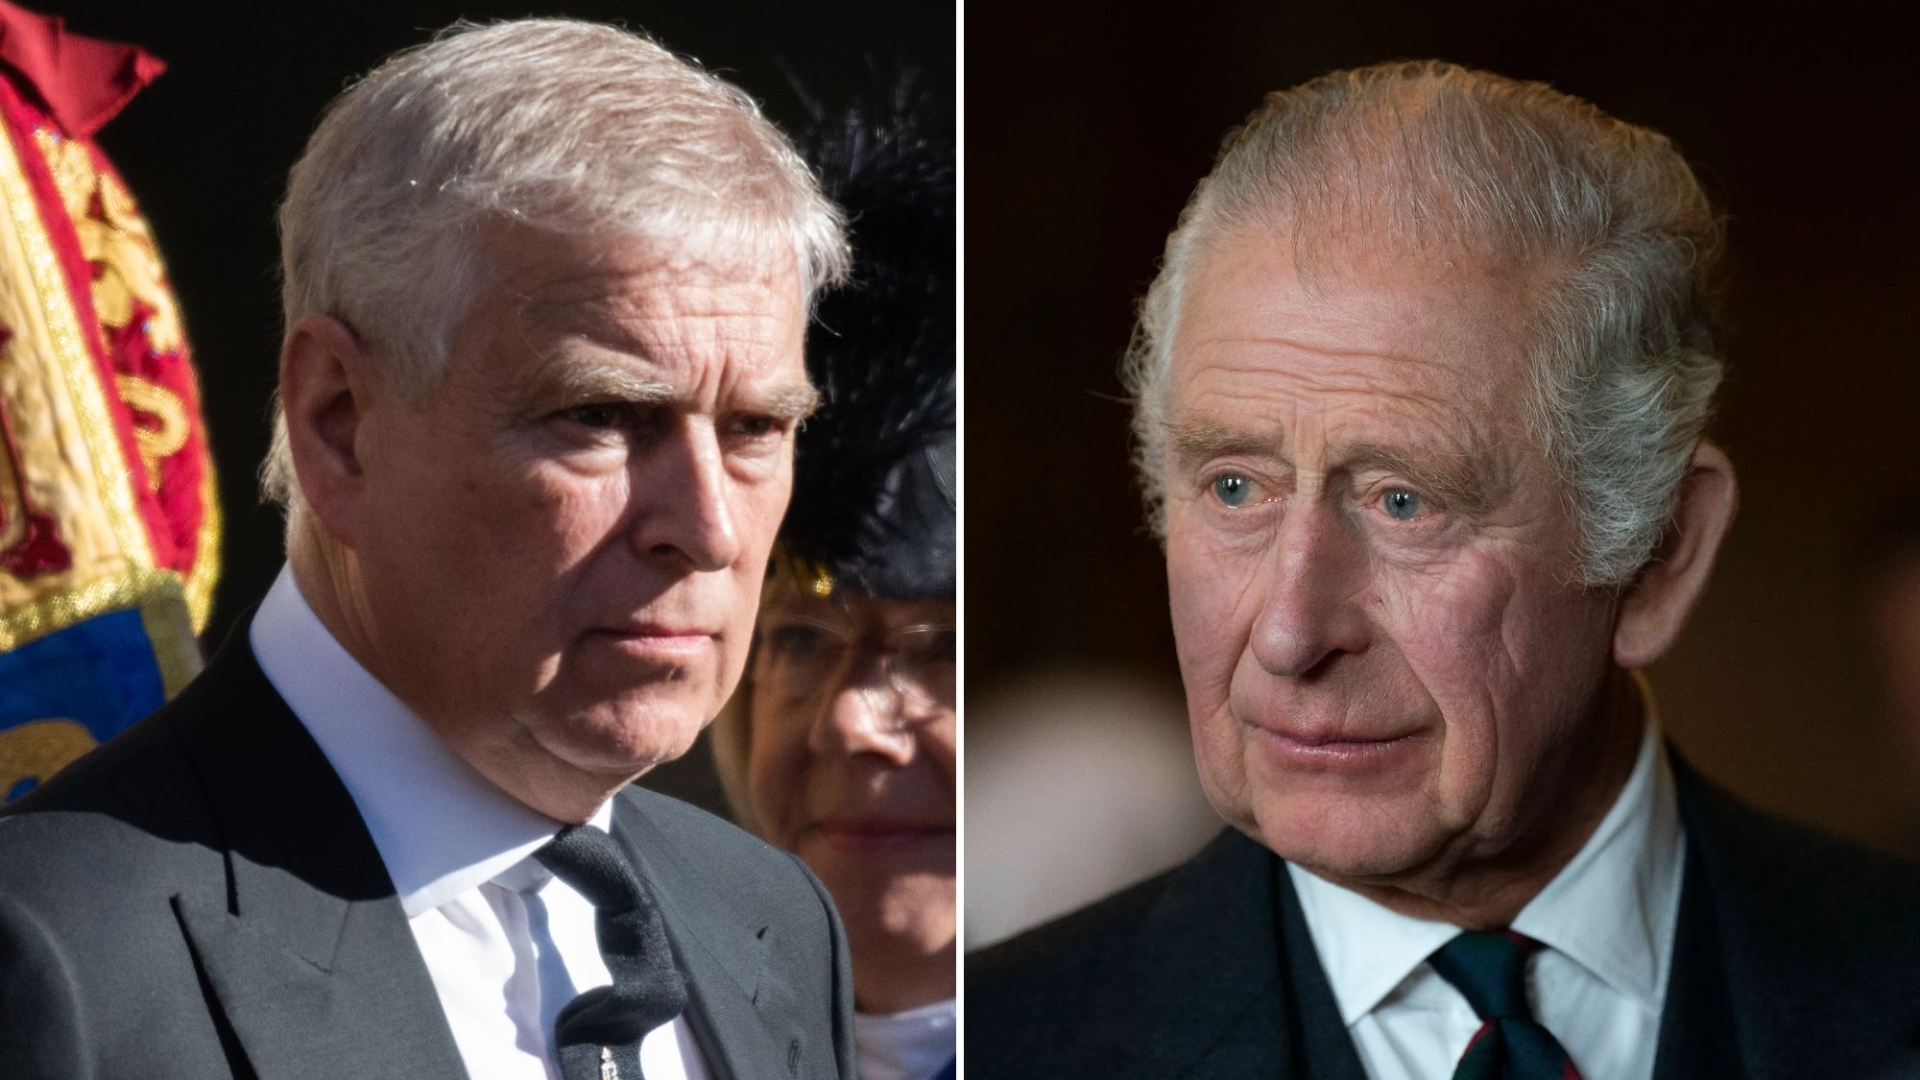 According to royal expert, King Charles’s rudeness towards Prince Andrew on his first day as monarch was “no coincidence at ALL”.